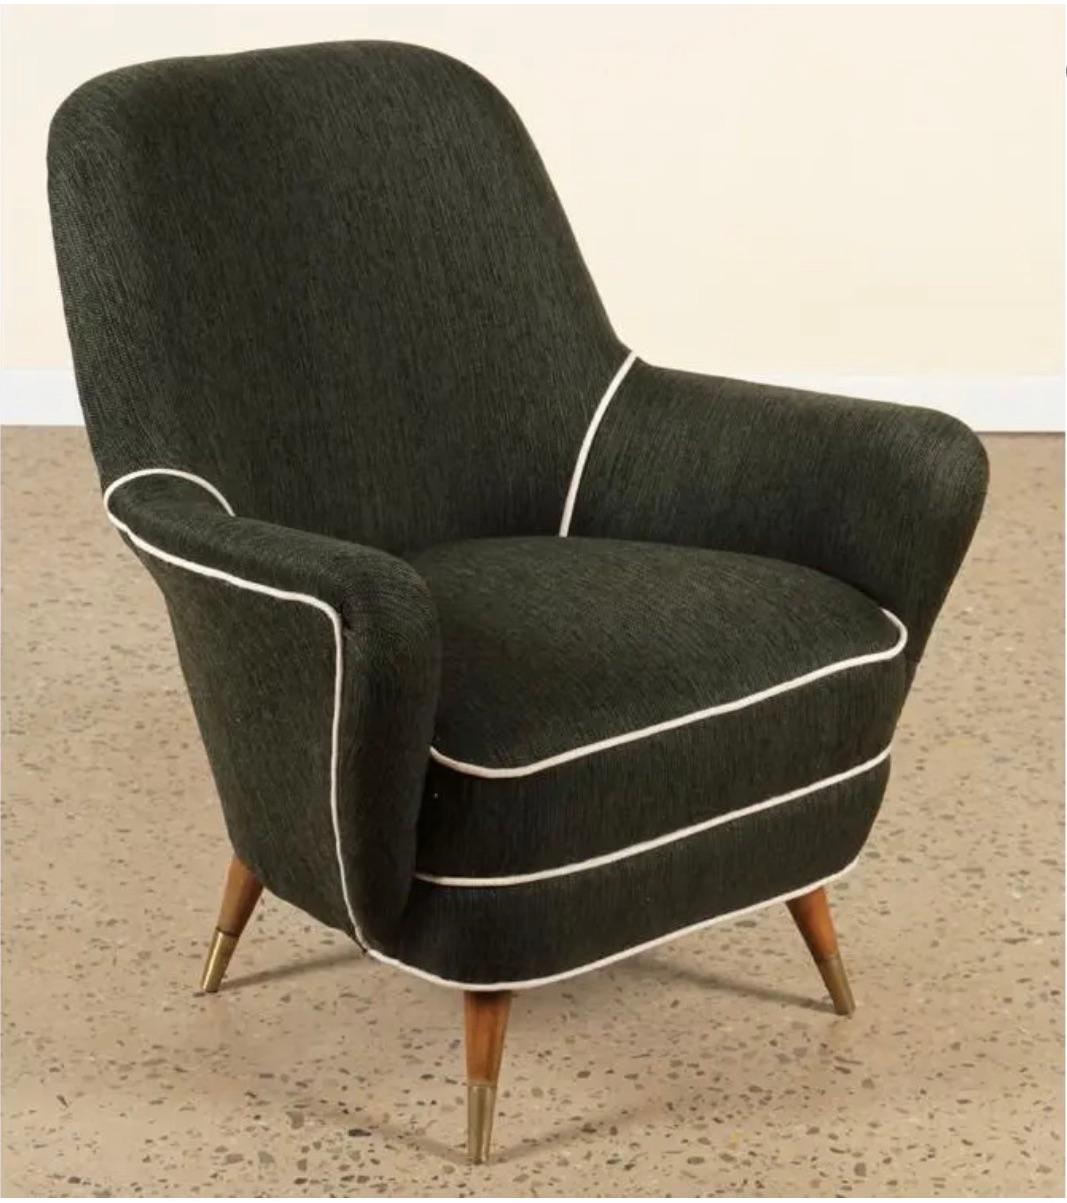 Unknown Pair of Mid-Century Modern Lounge Chairs For Sale